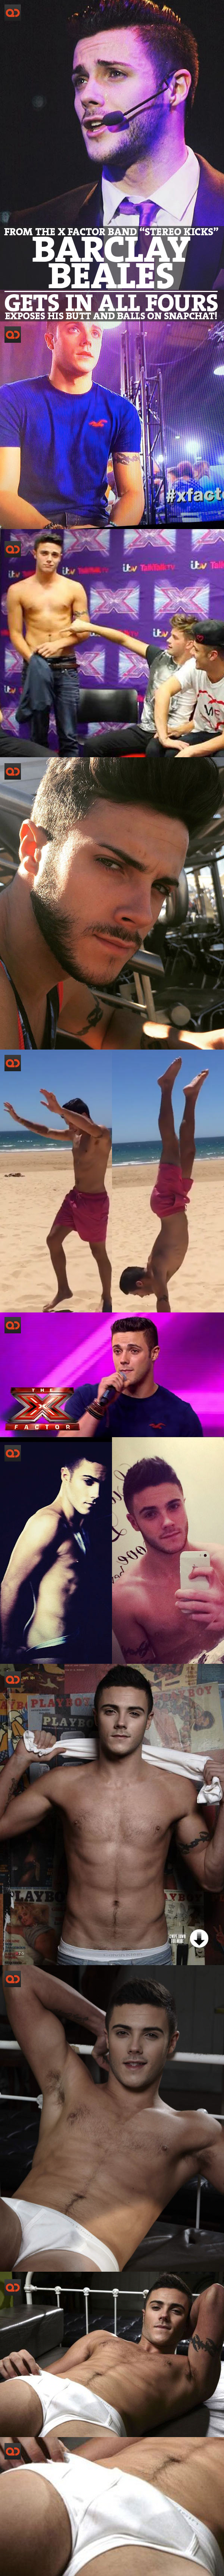 Barclay Beales, From The X Factor Band “Stereo Kicks”, Gets In All Fours And Exposes His Naked Butt On Snapchat!